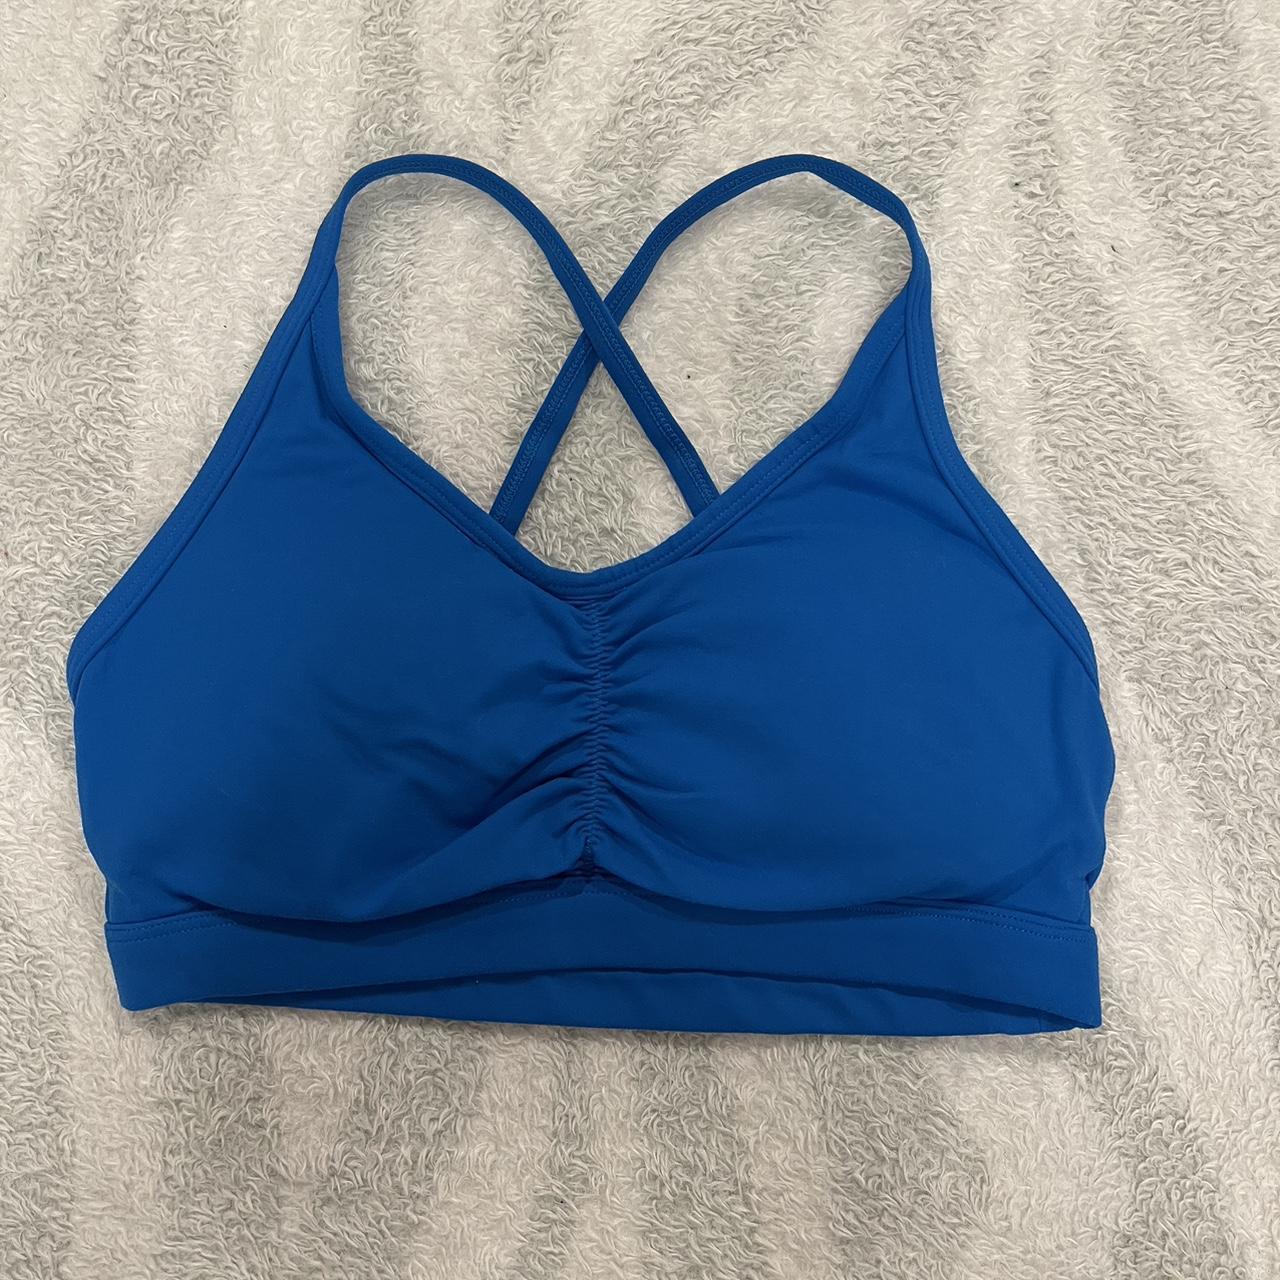 Aoxjox sports bra - gymshark dupe , #workout